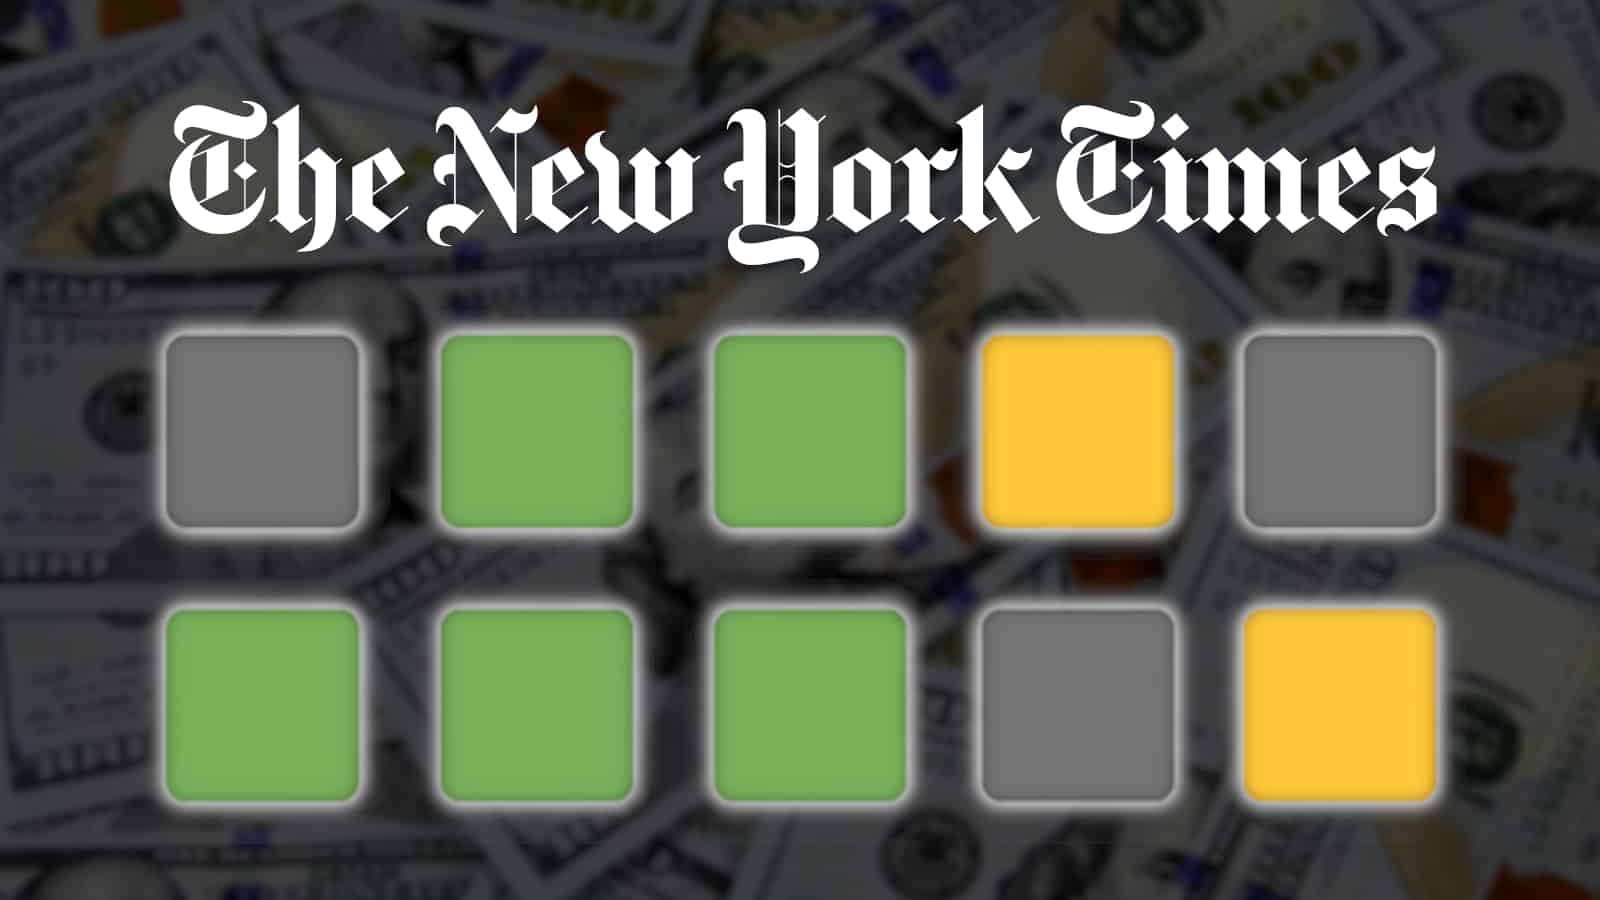 Wordle acquired by New York Times, will remain free to play